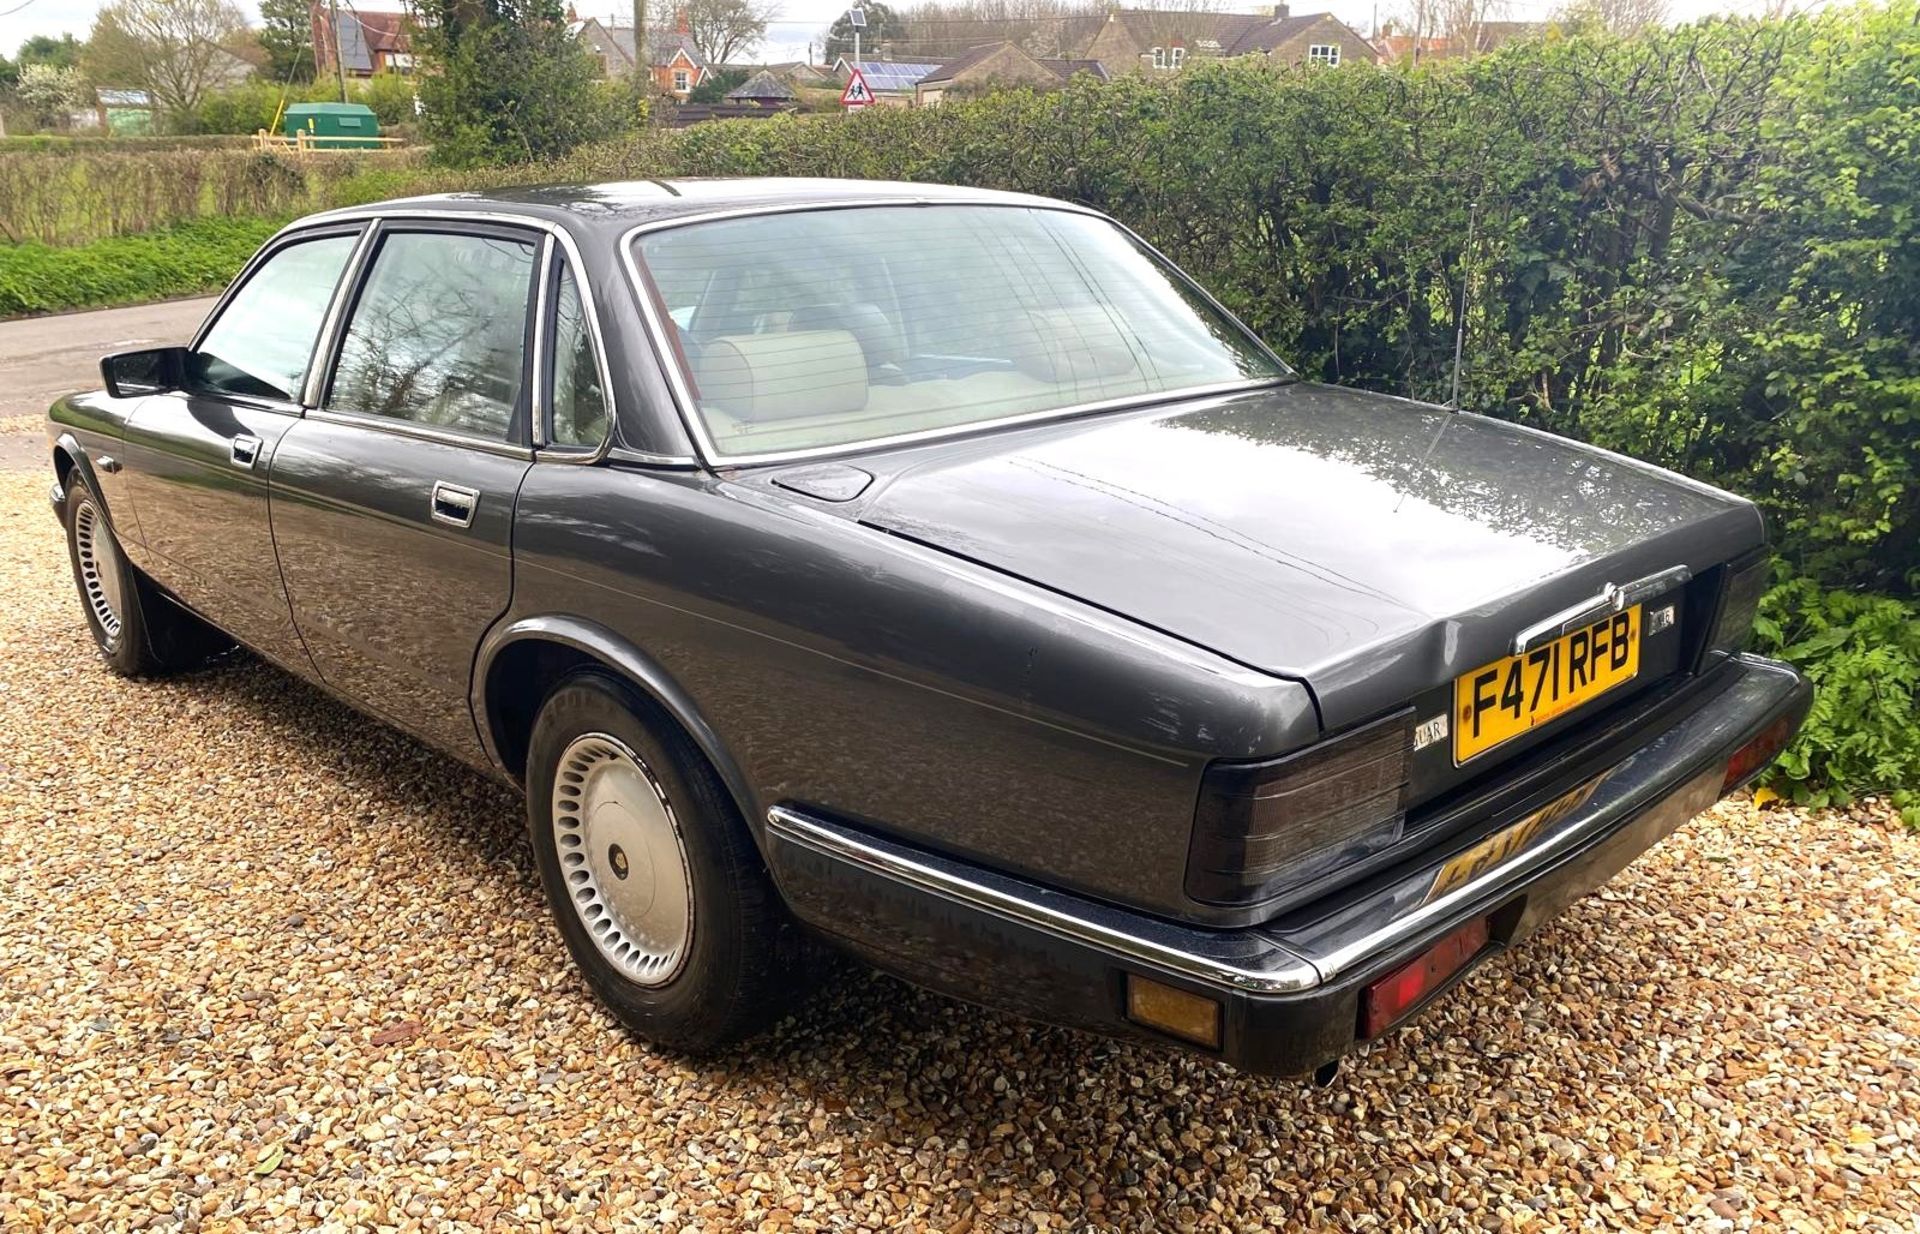 1989 JAGUAR XJ40 3.6 Registration Number: F471 RFB Chassis Number: SAJJFALH3AA576567 Recorded - Image 4 of 8